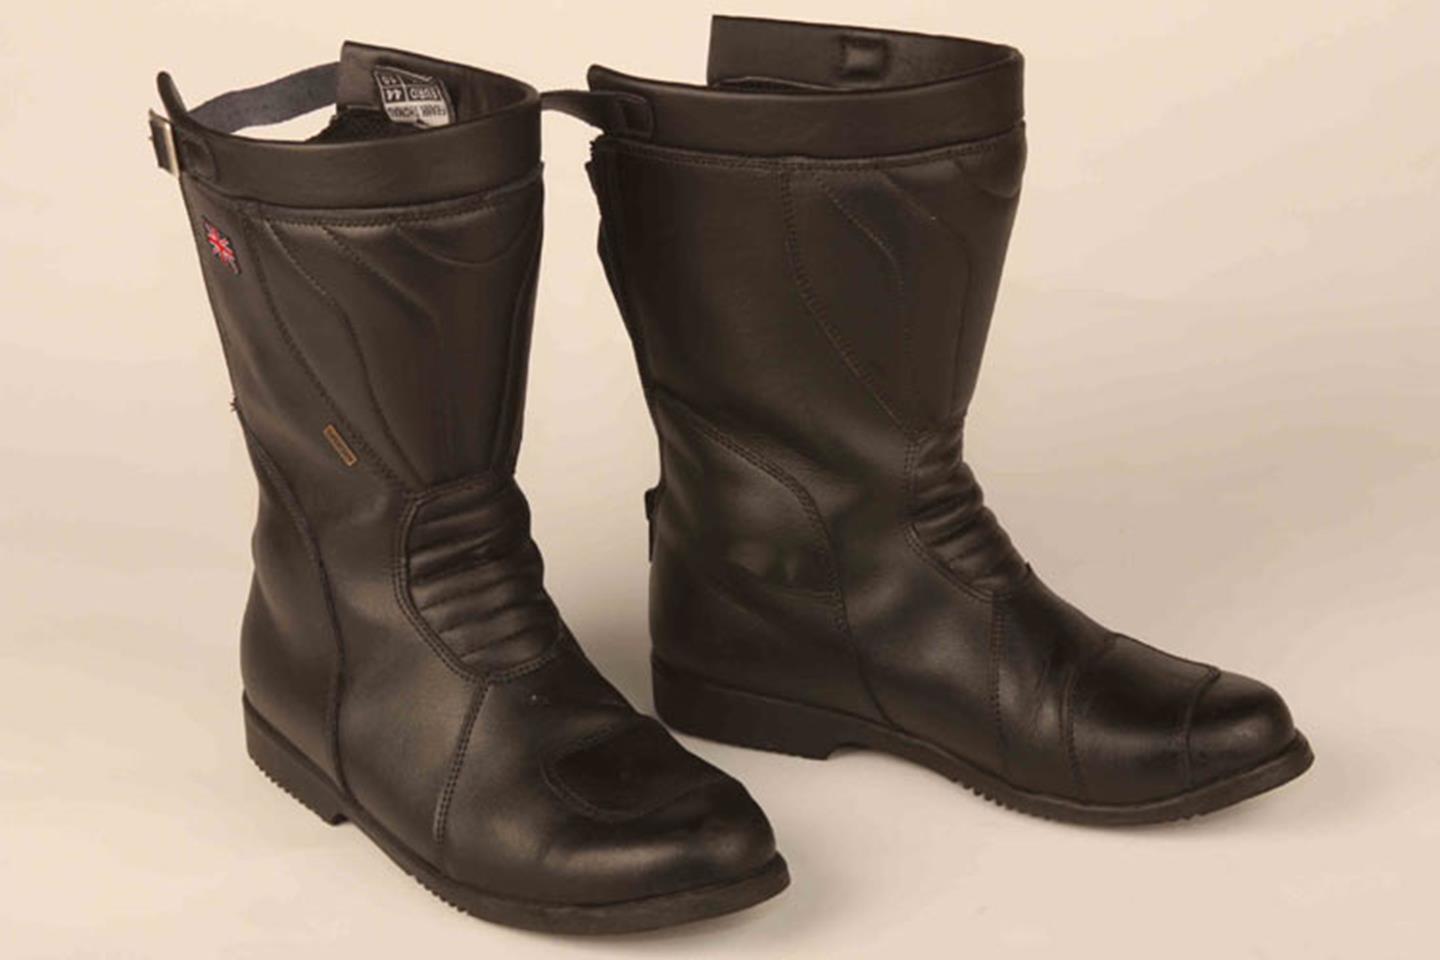 classic motorcycle boots uk